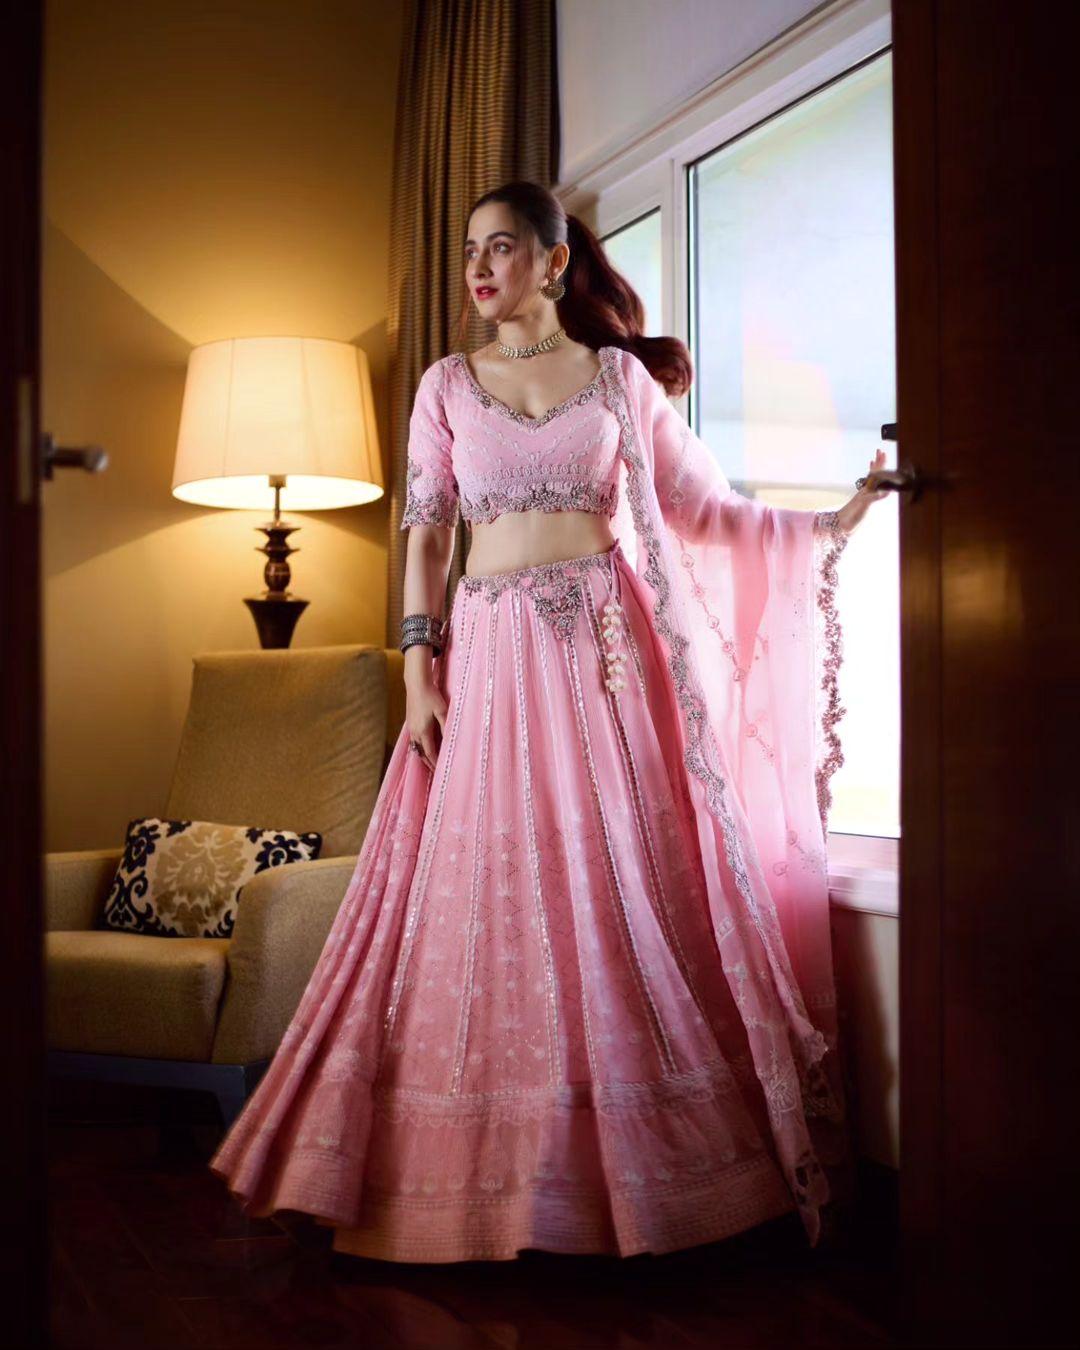 The beautiful lehenga flared out to fully put on the display of the ensemble